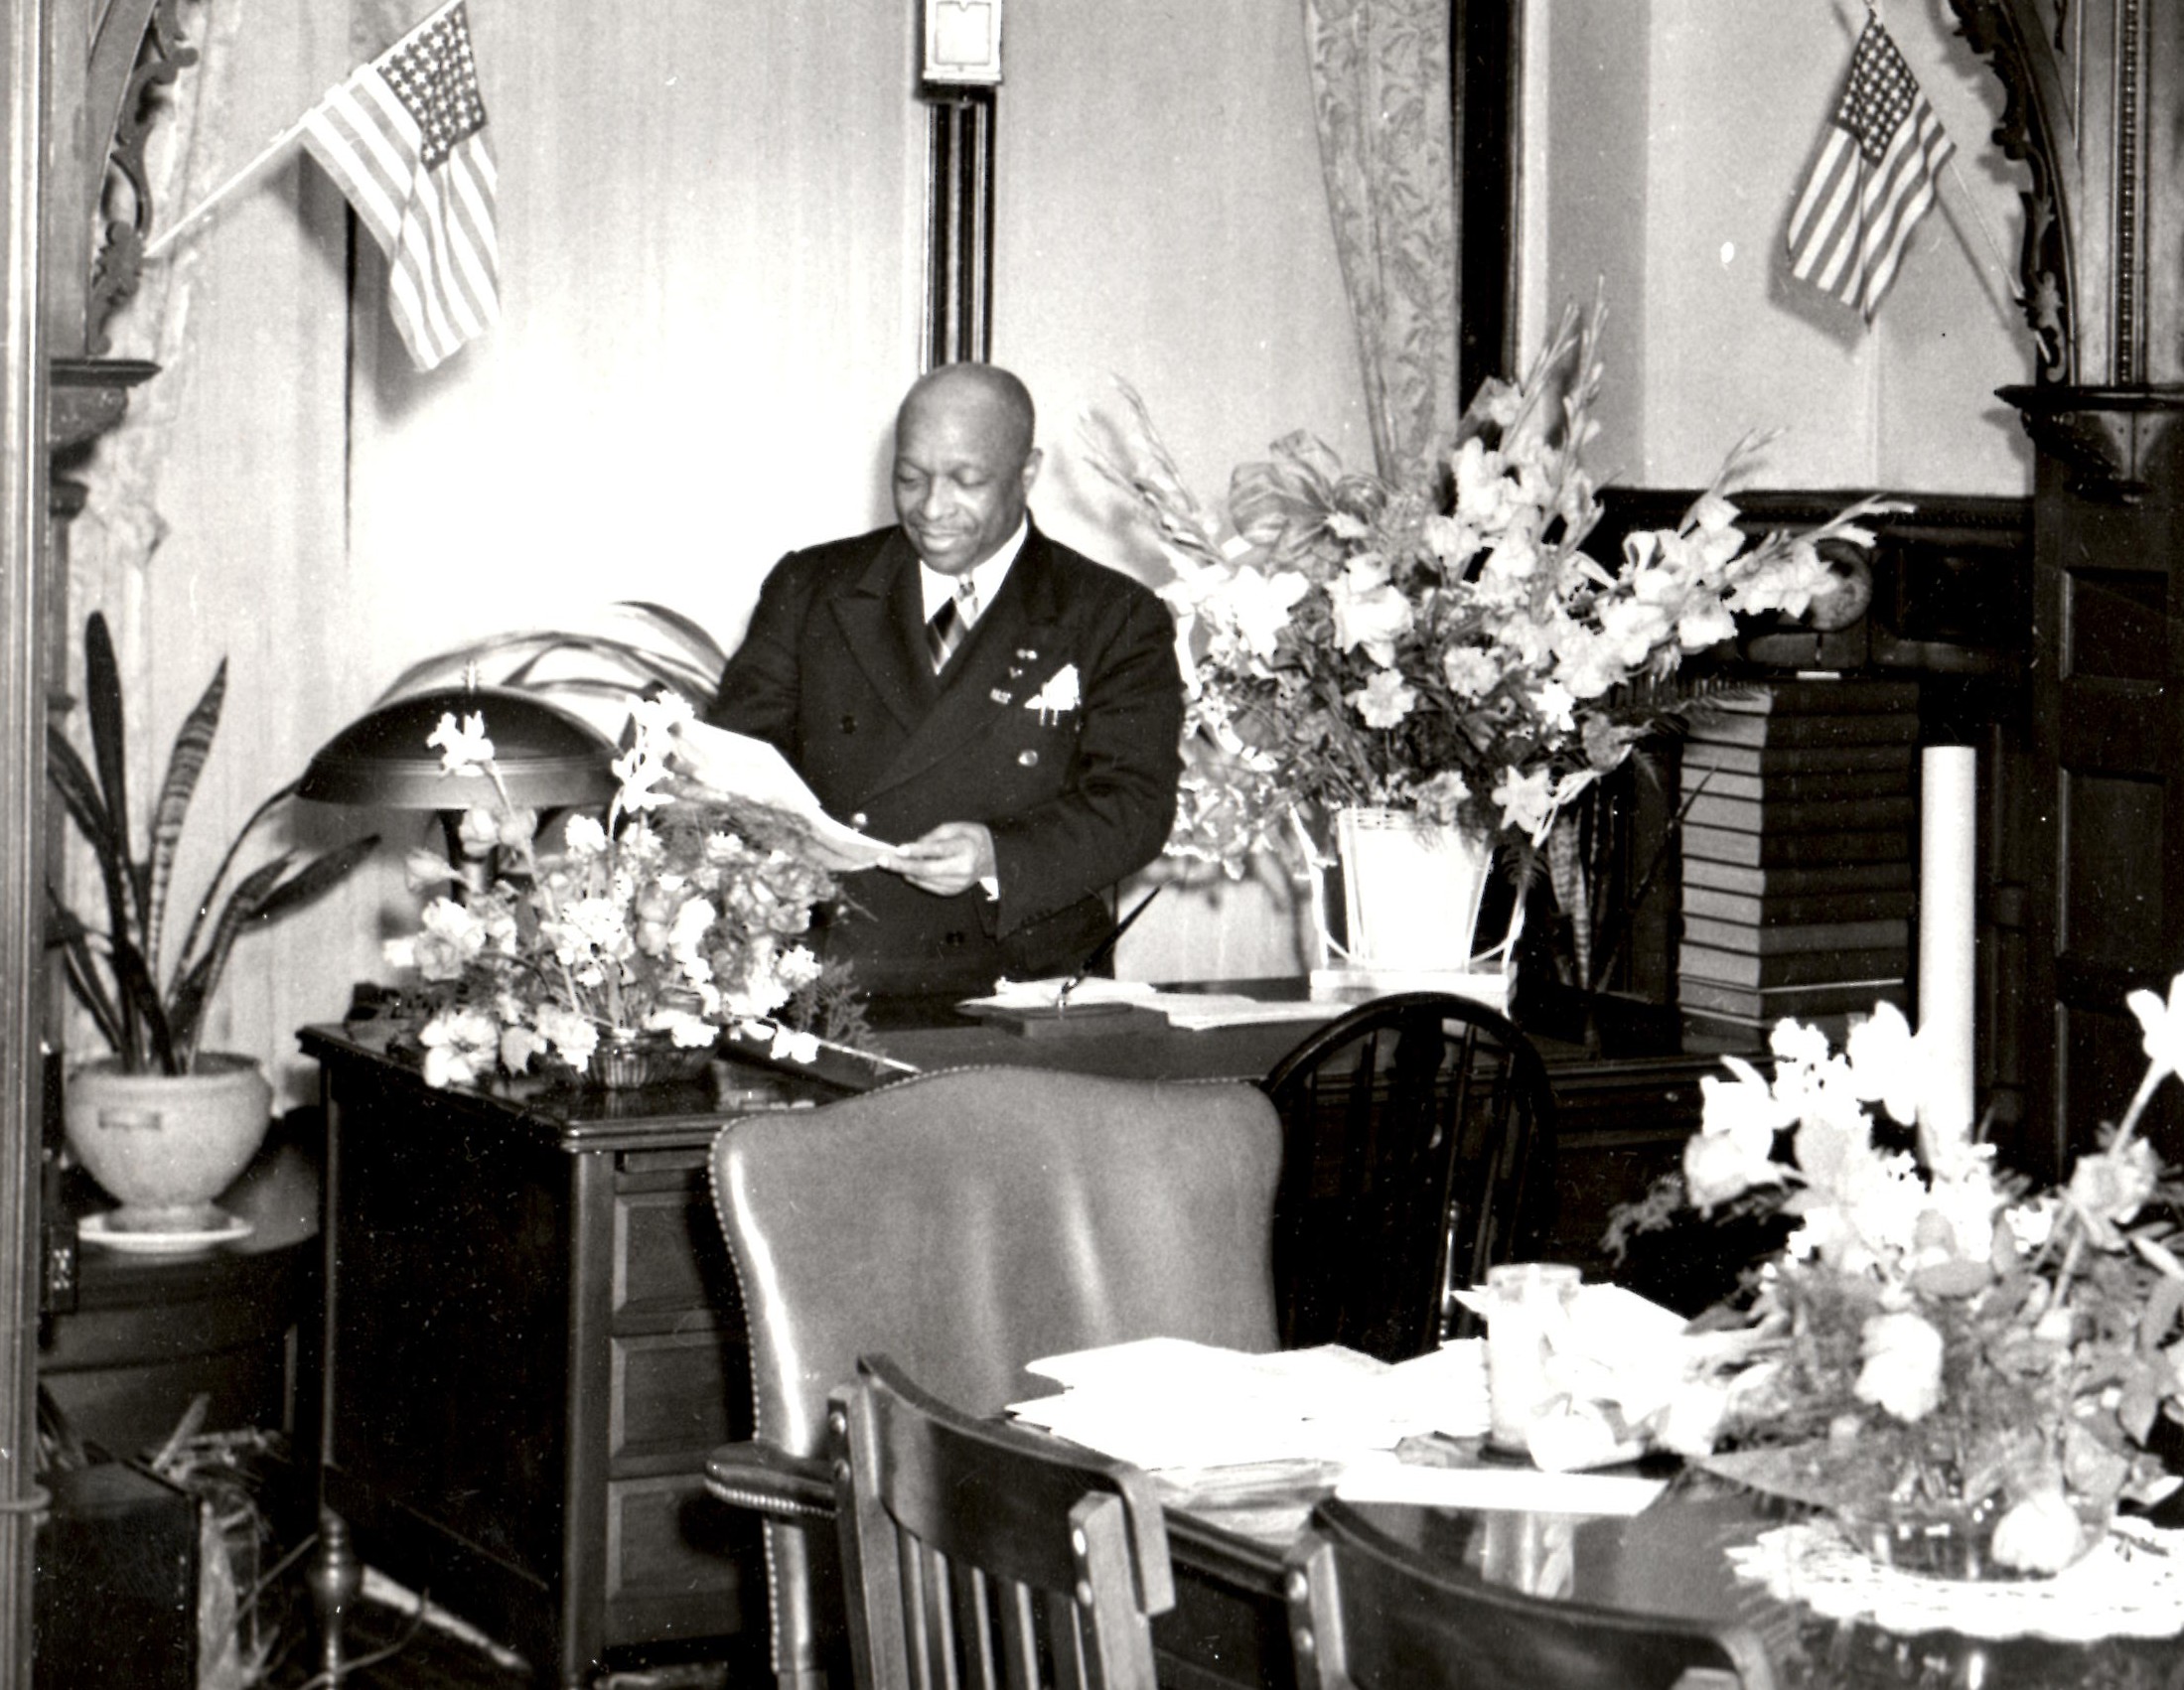 FATHER DIVINE in His office at the Circle Mission Church.